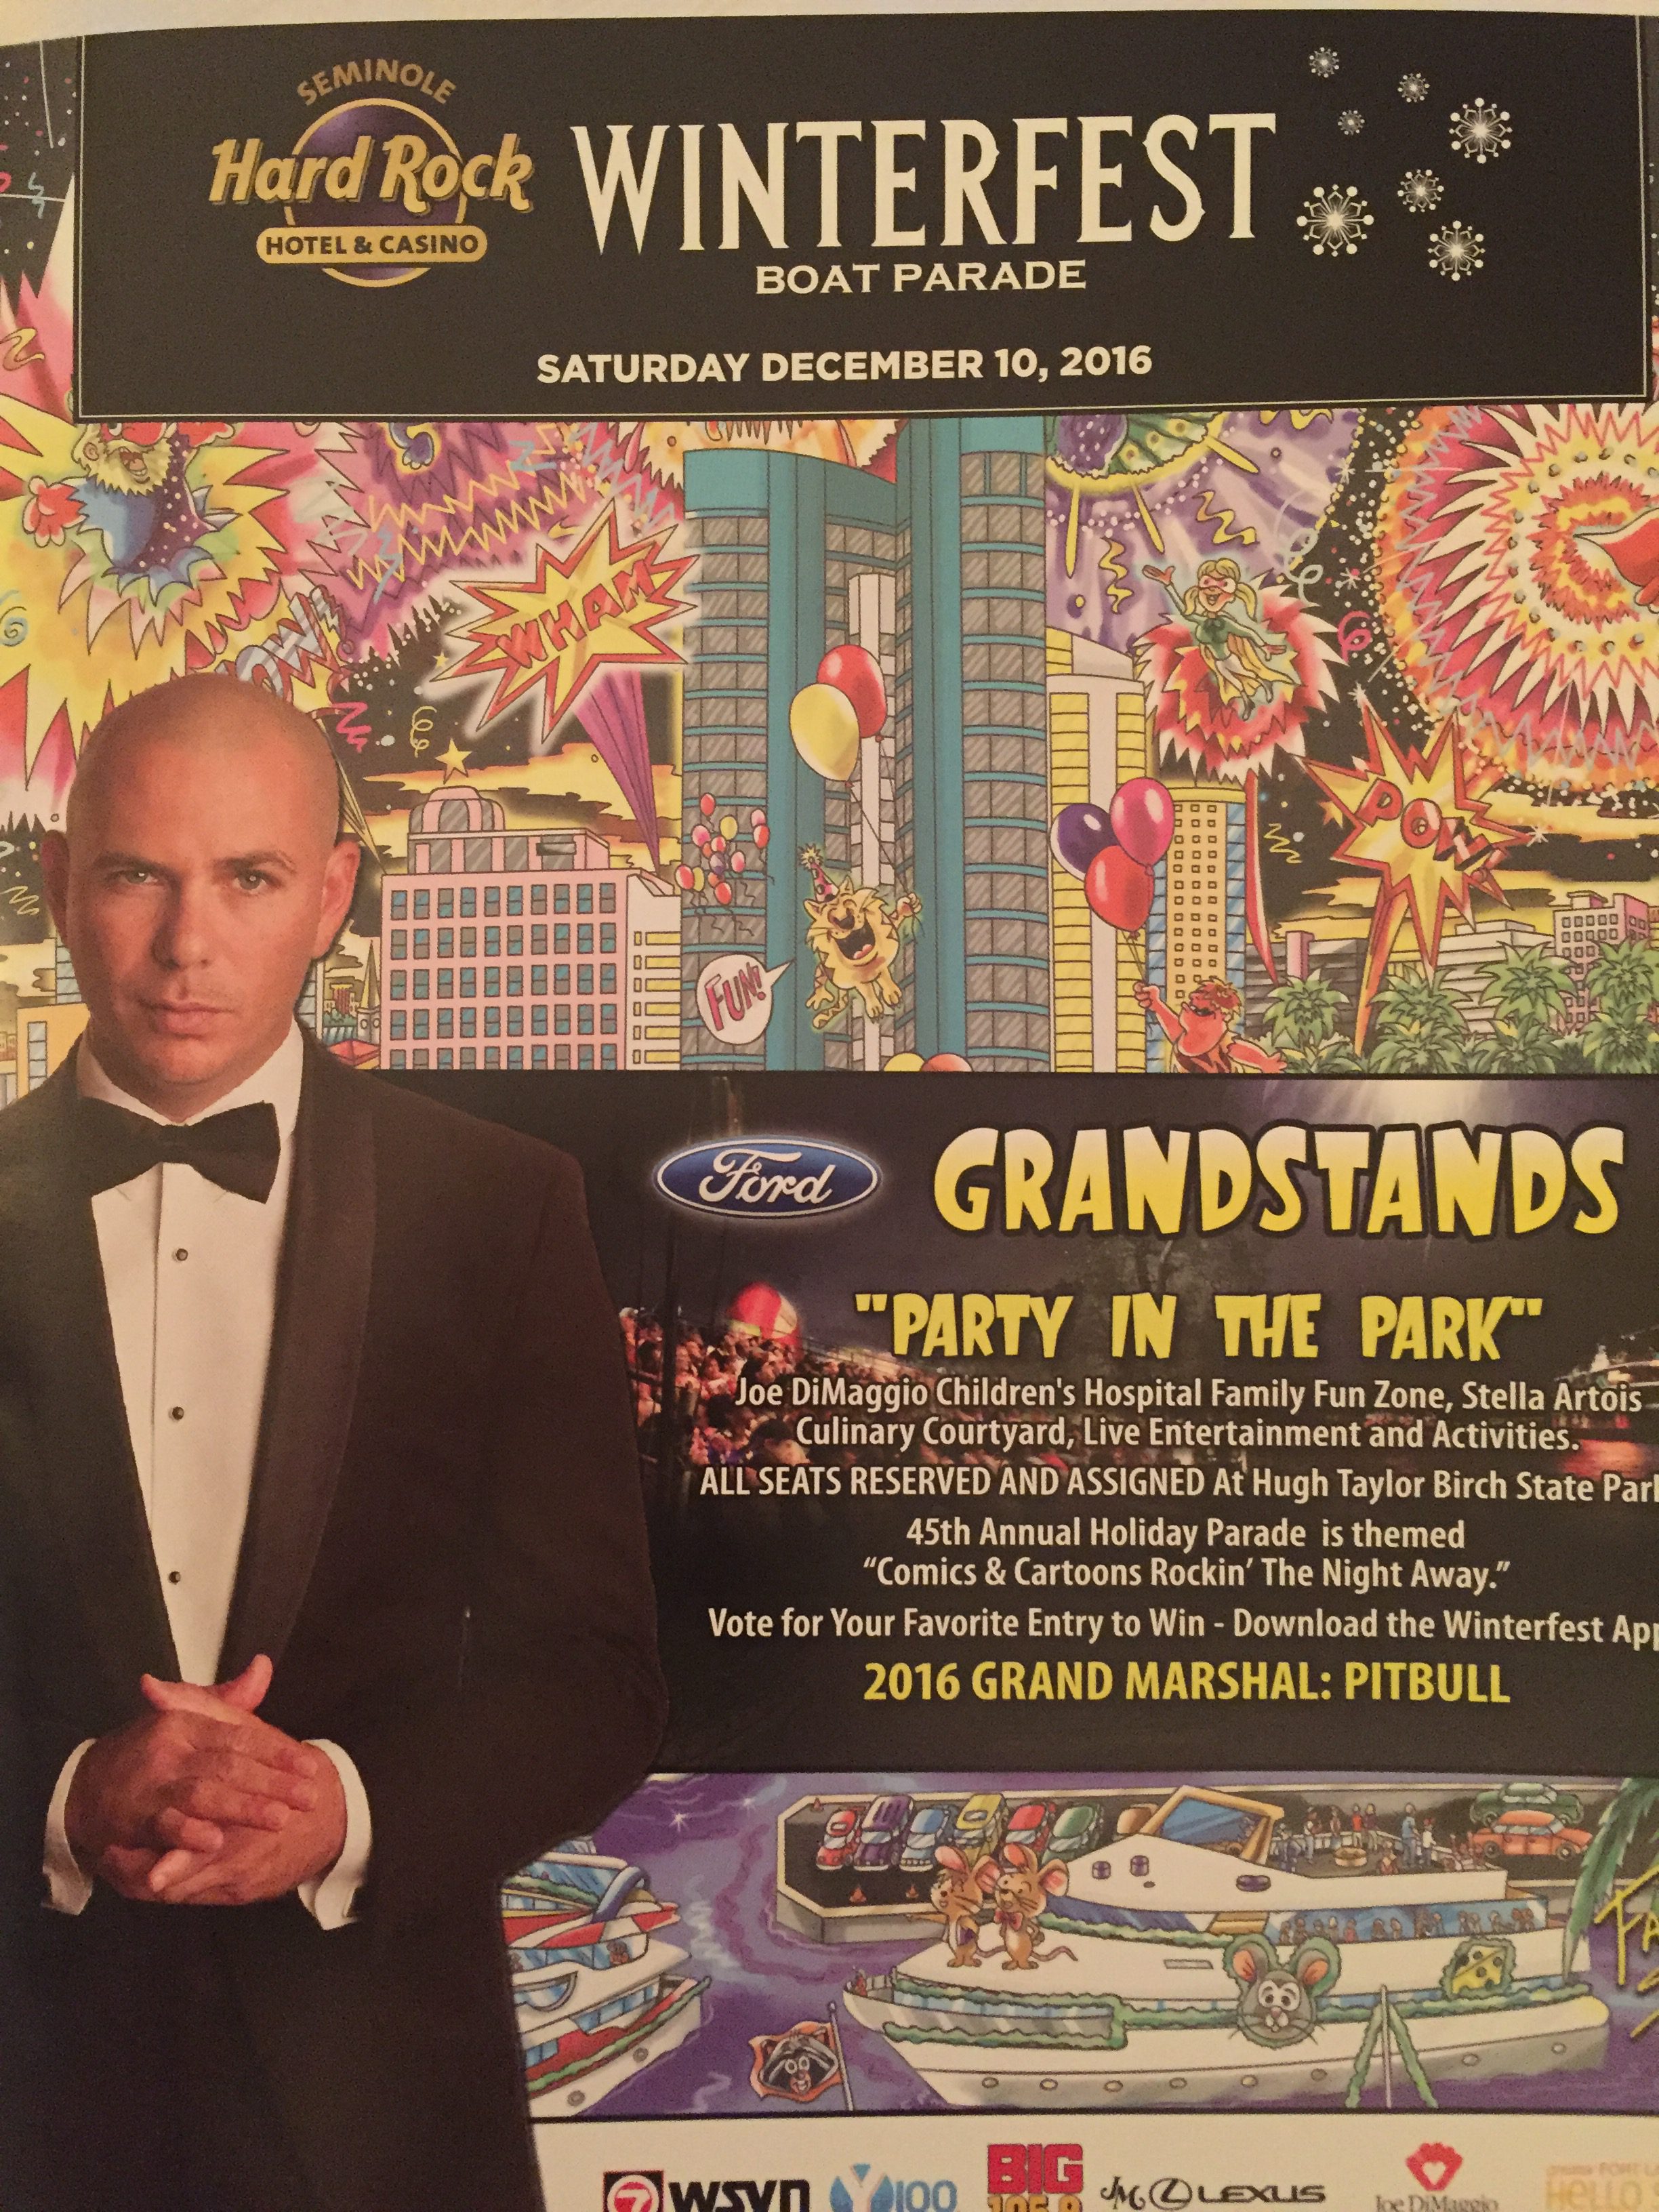 Grand Marshall Pitbull will be at Ft. Lauderdale's Winterfest Boat Parade 2016